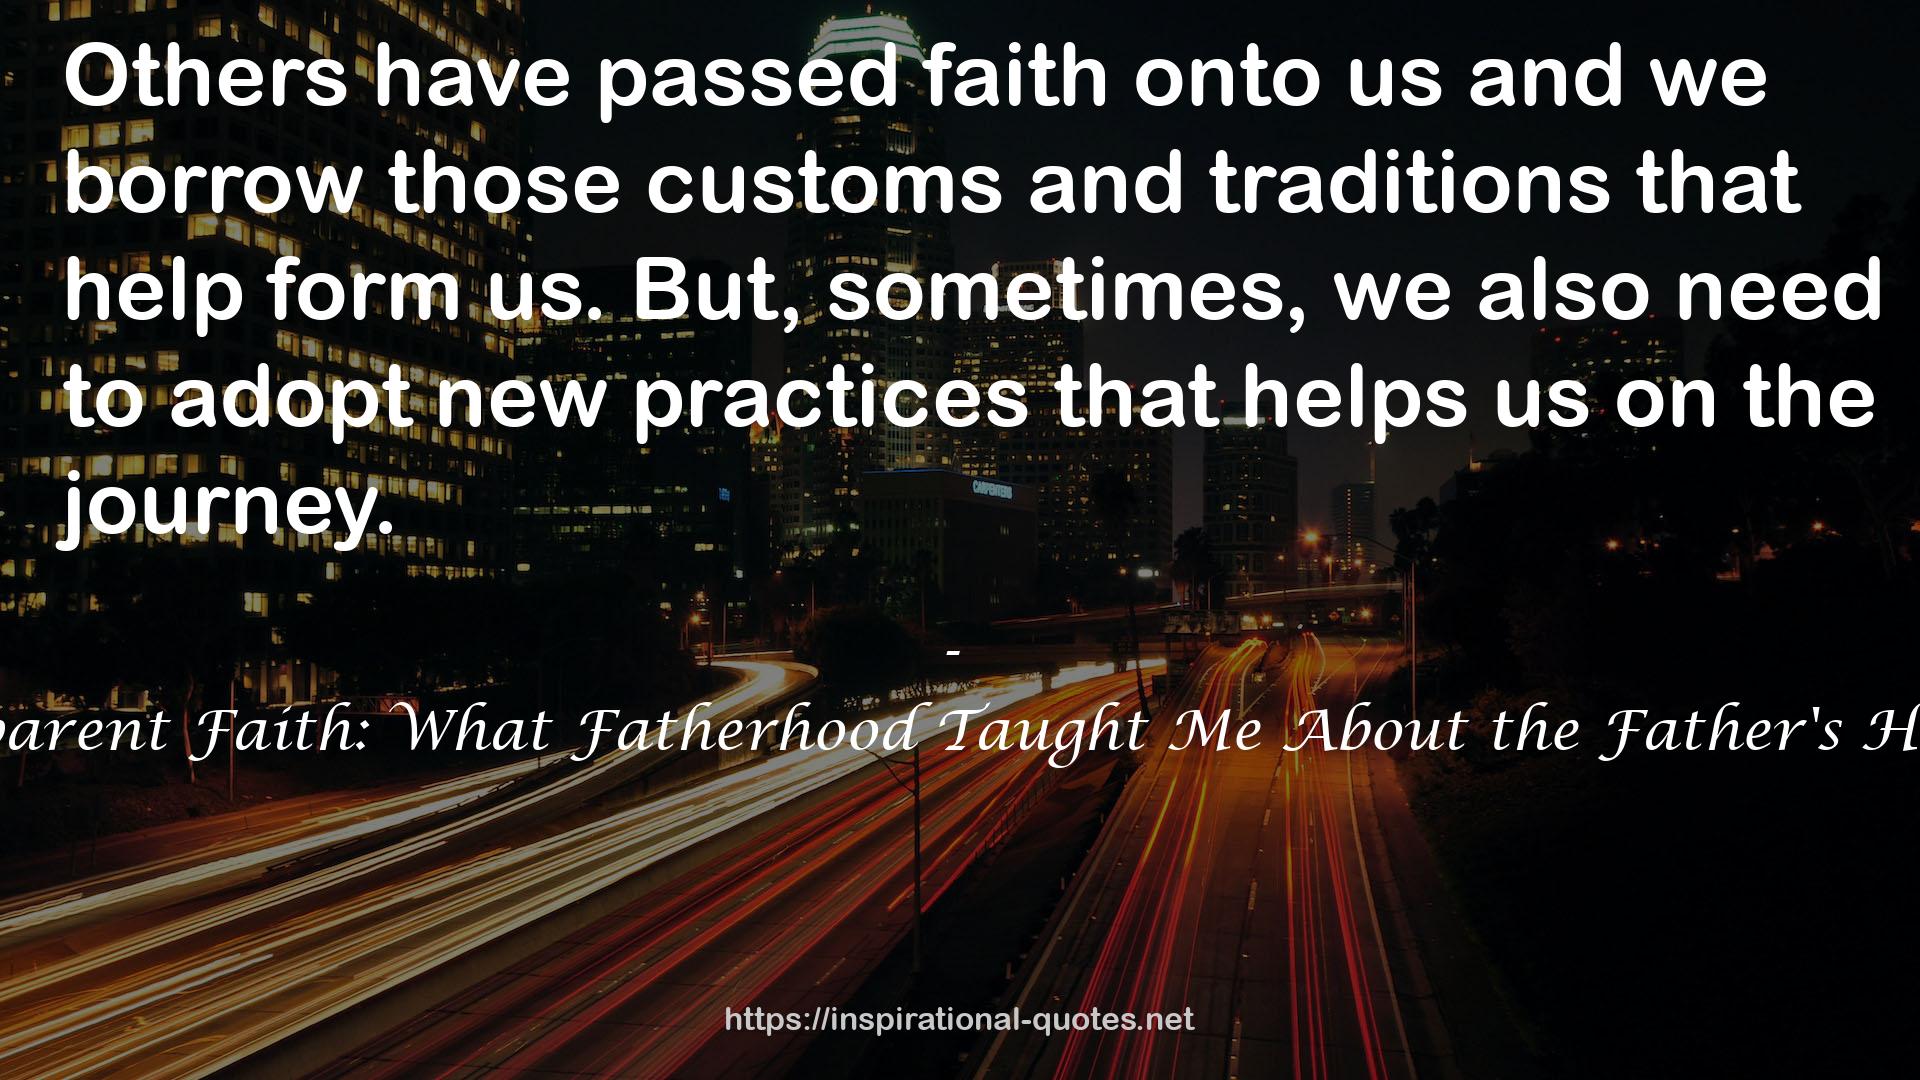 Apparent Faith: What Fatherhood Taught Me About the Father's Heart QUOTES